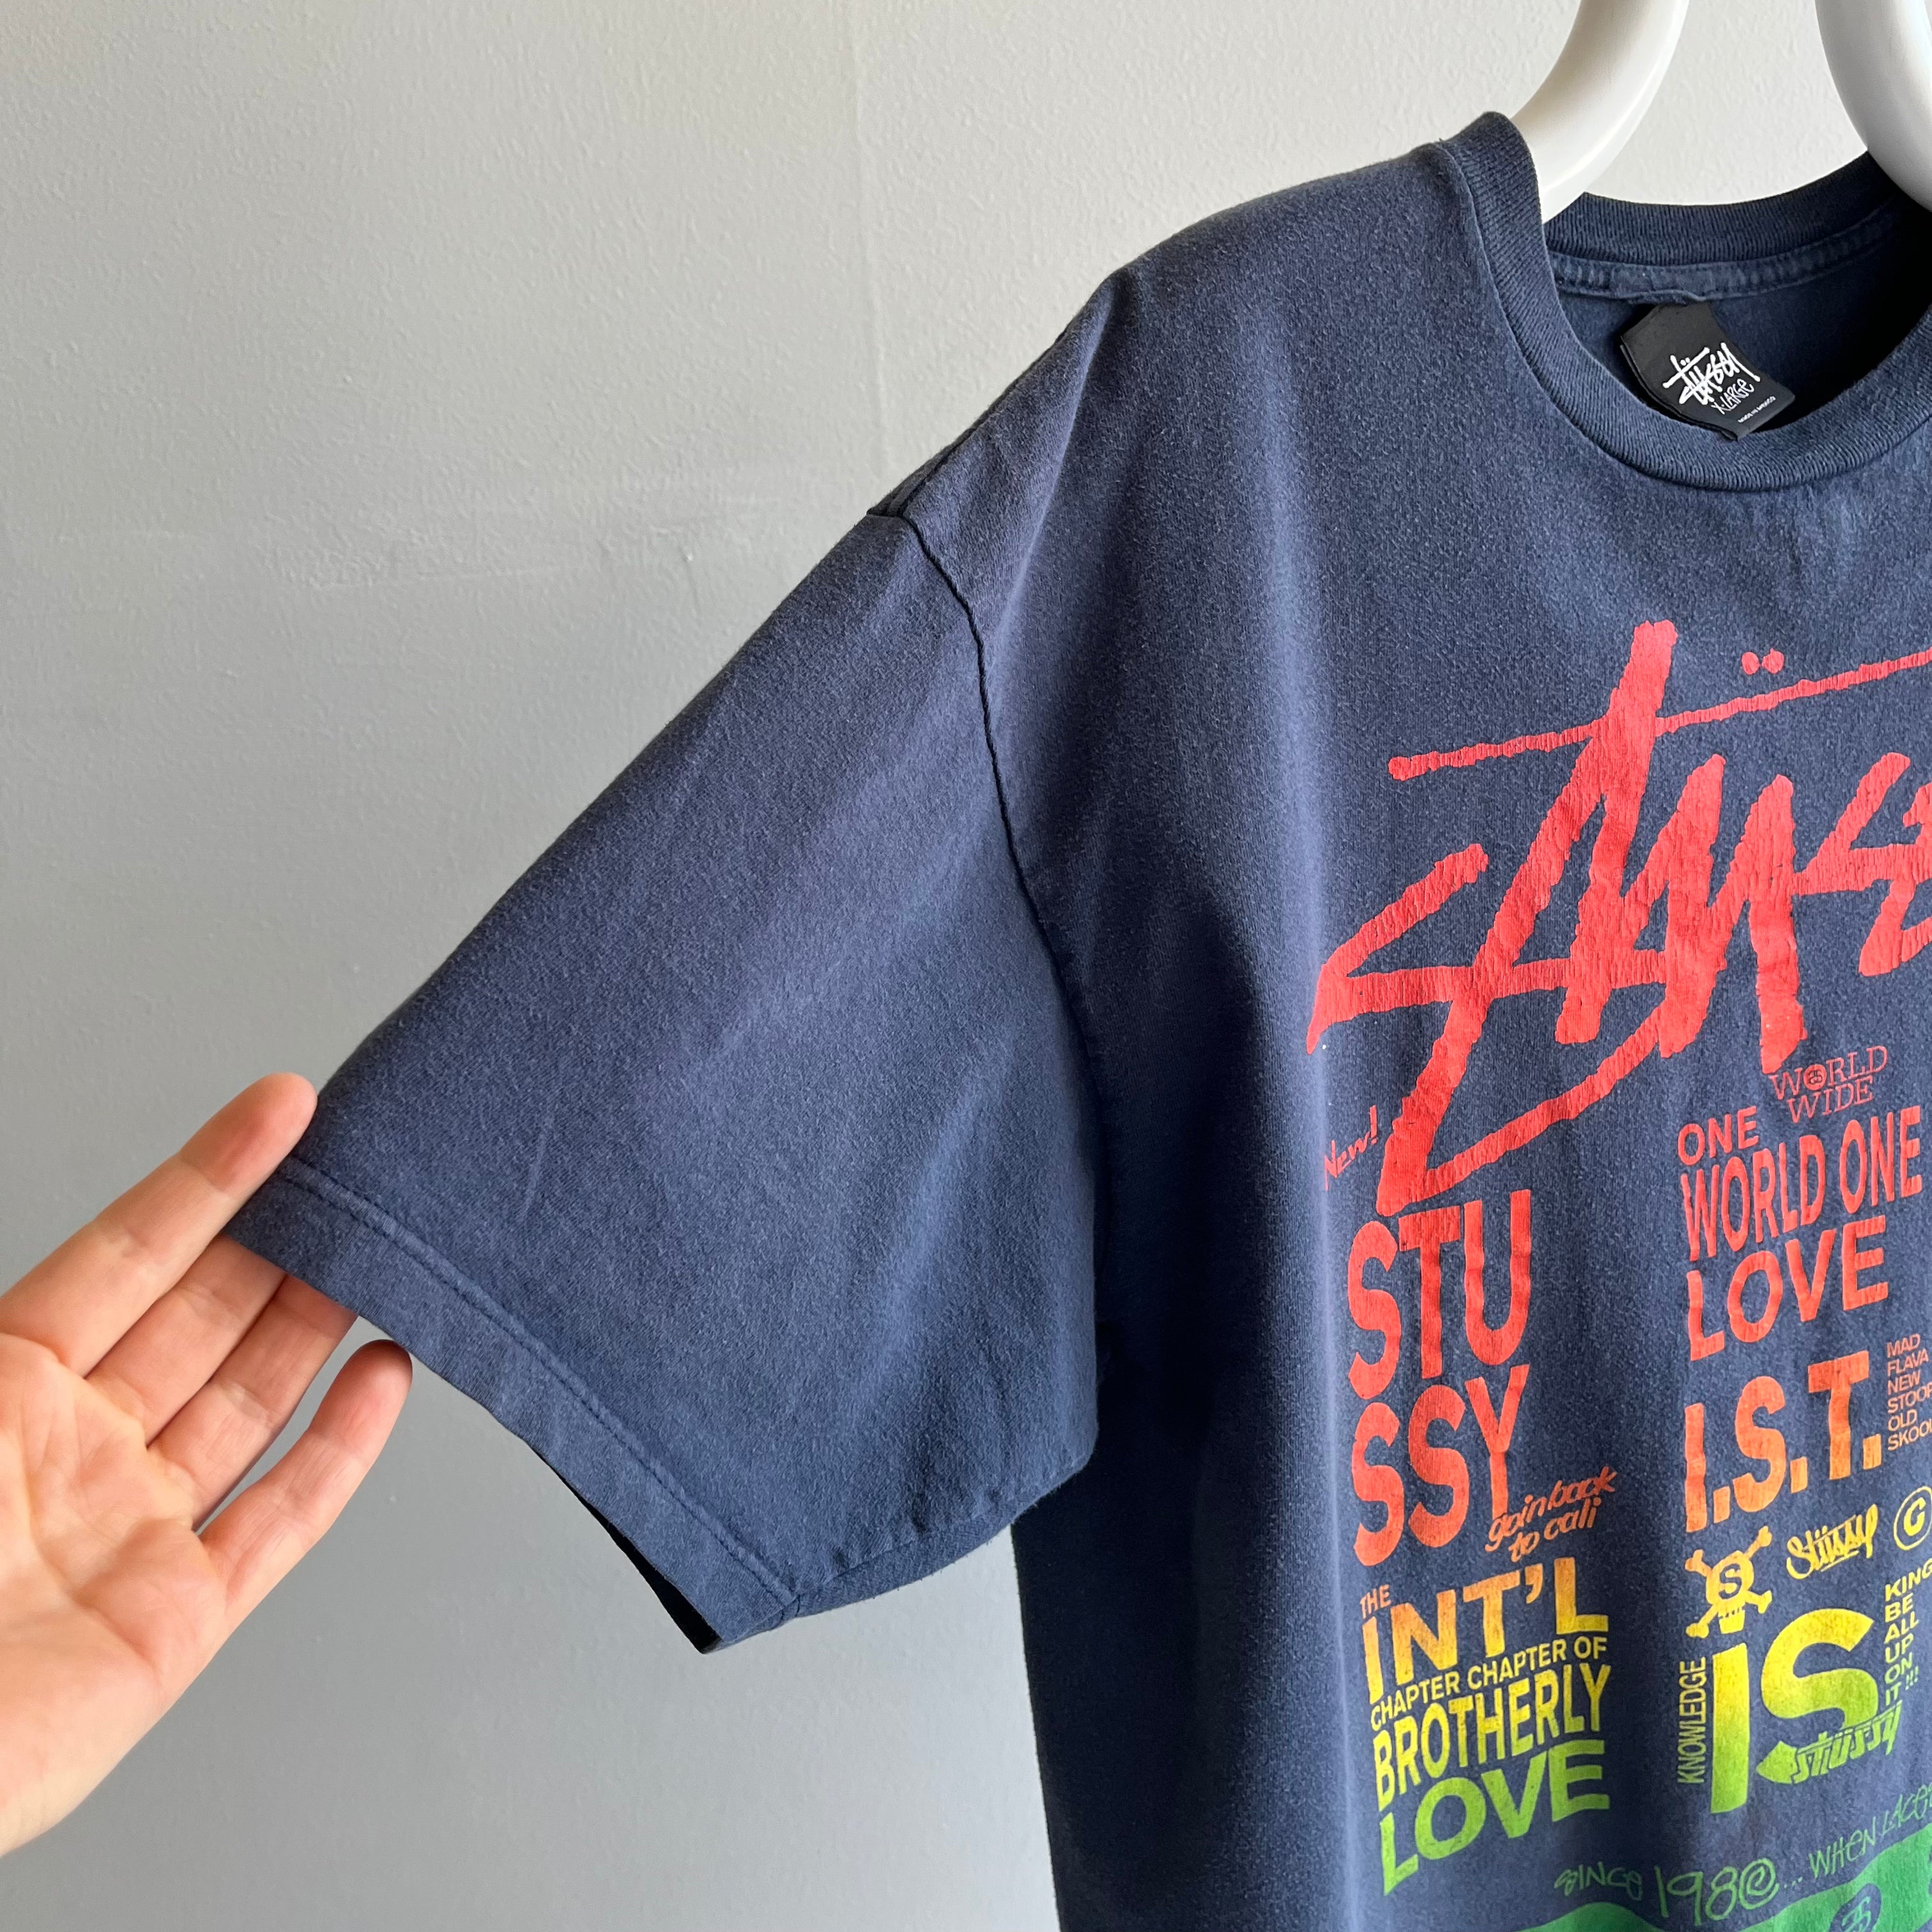 Vintage Stussy Large And In Charge T-Shirt